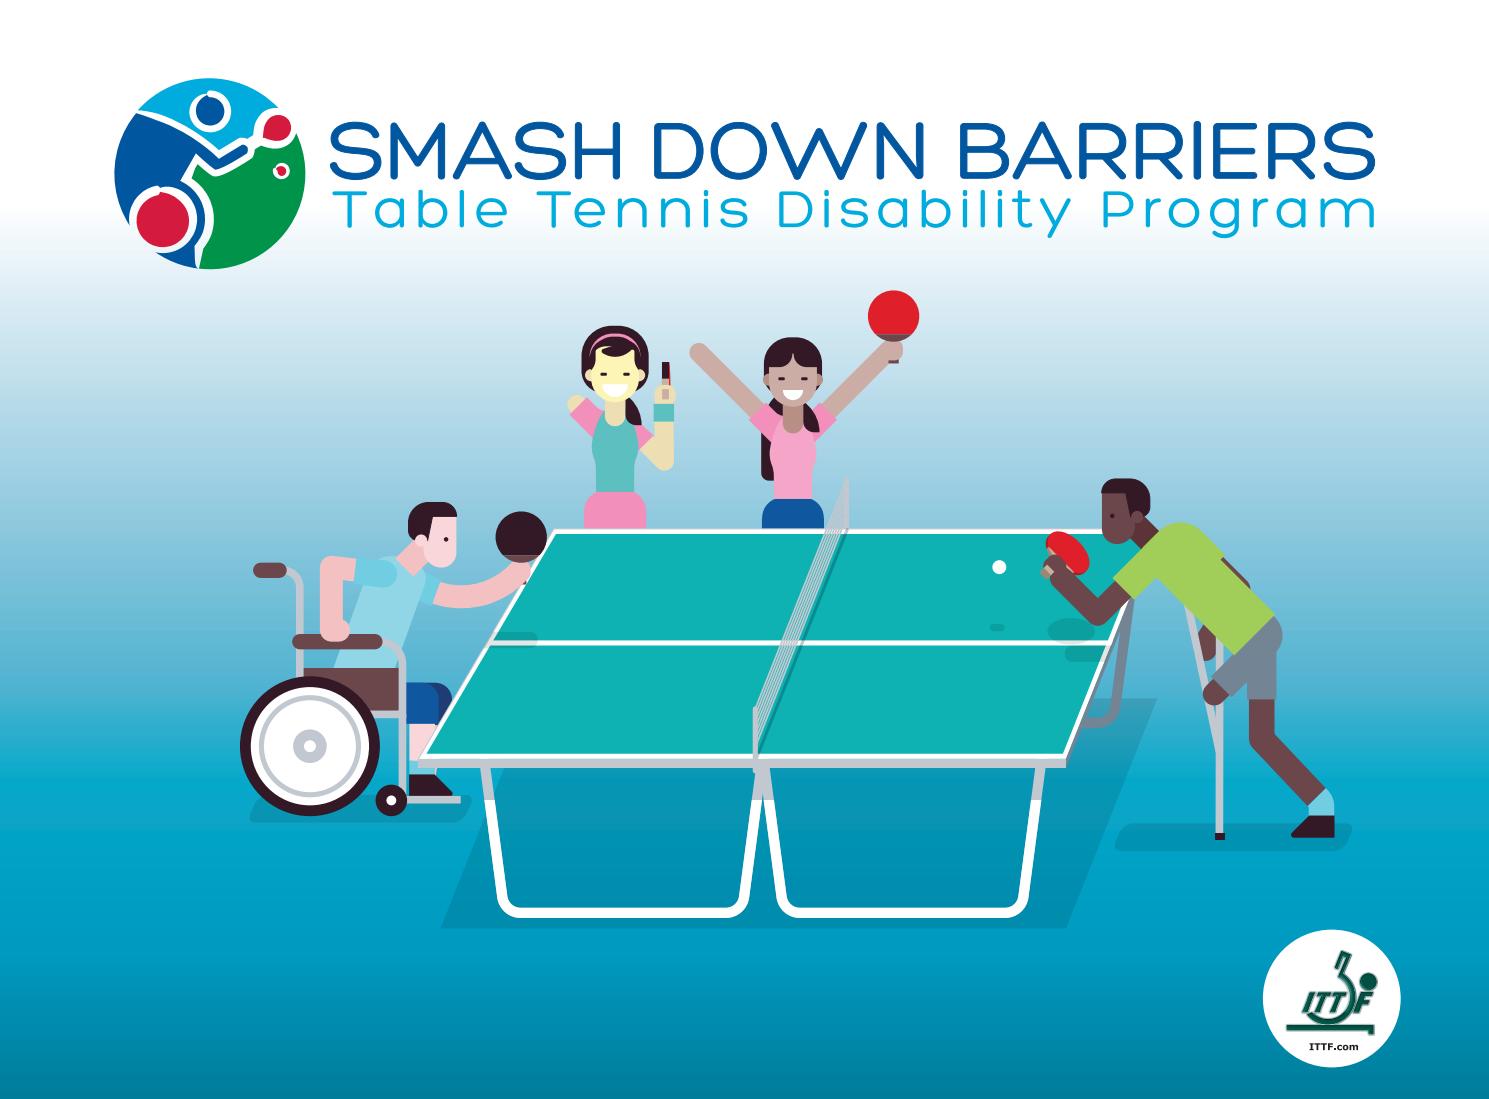 "Smash down barriers table disability program"